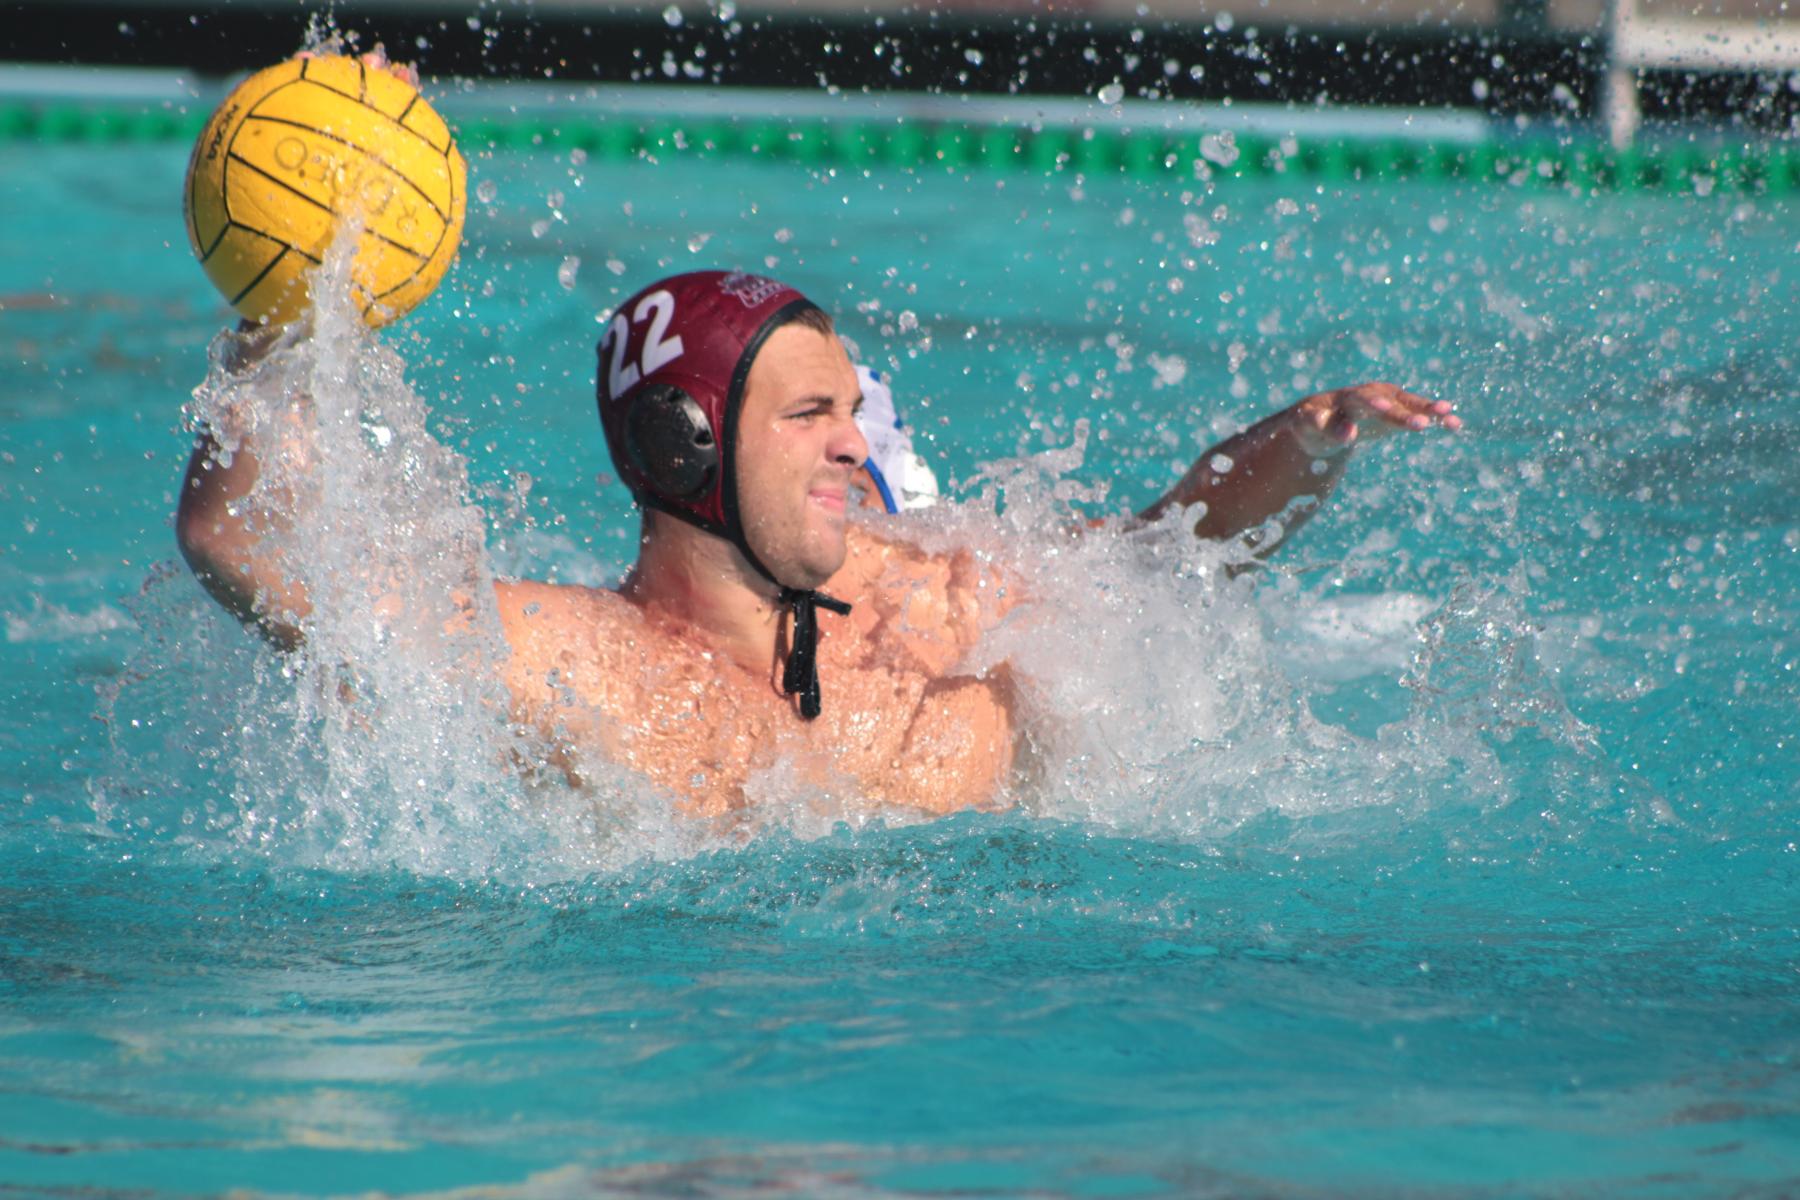 Broncos Top Fresno Pacific Saturday in WWPA Tournament Game; Play LMU Sunday